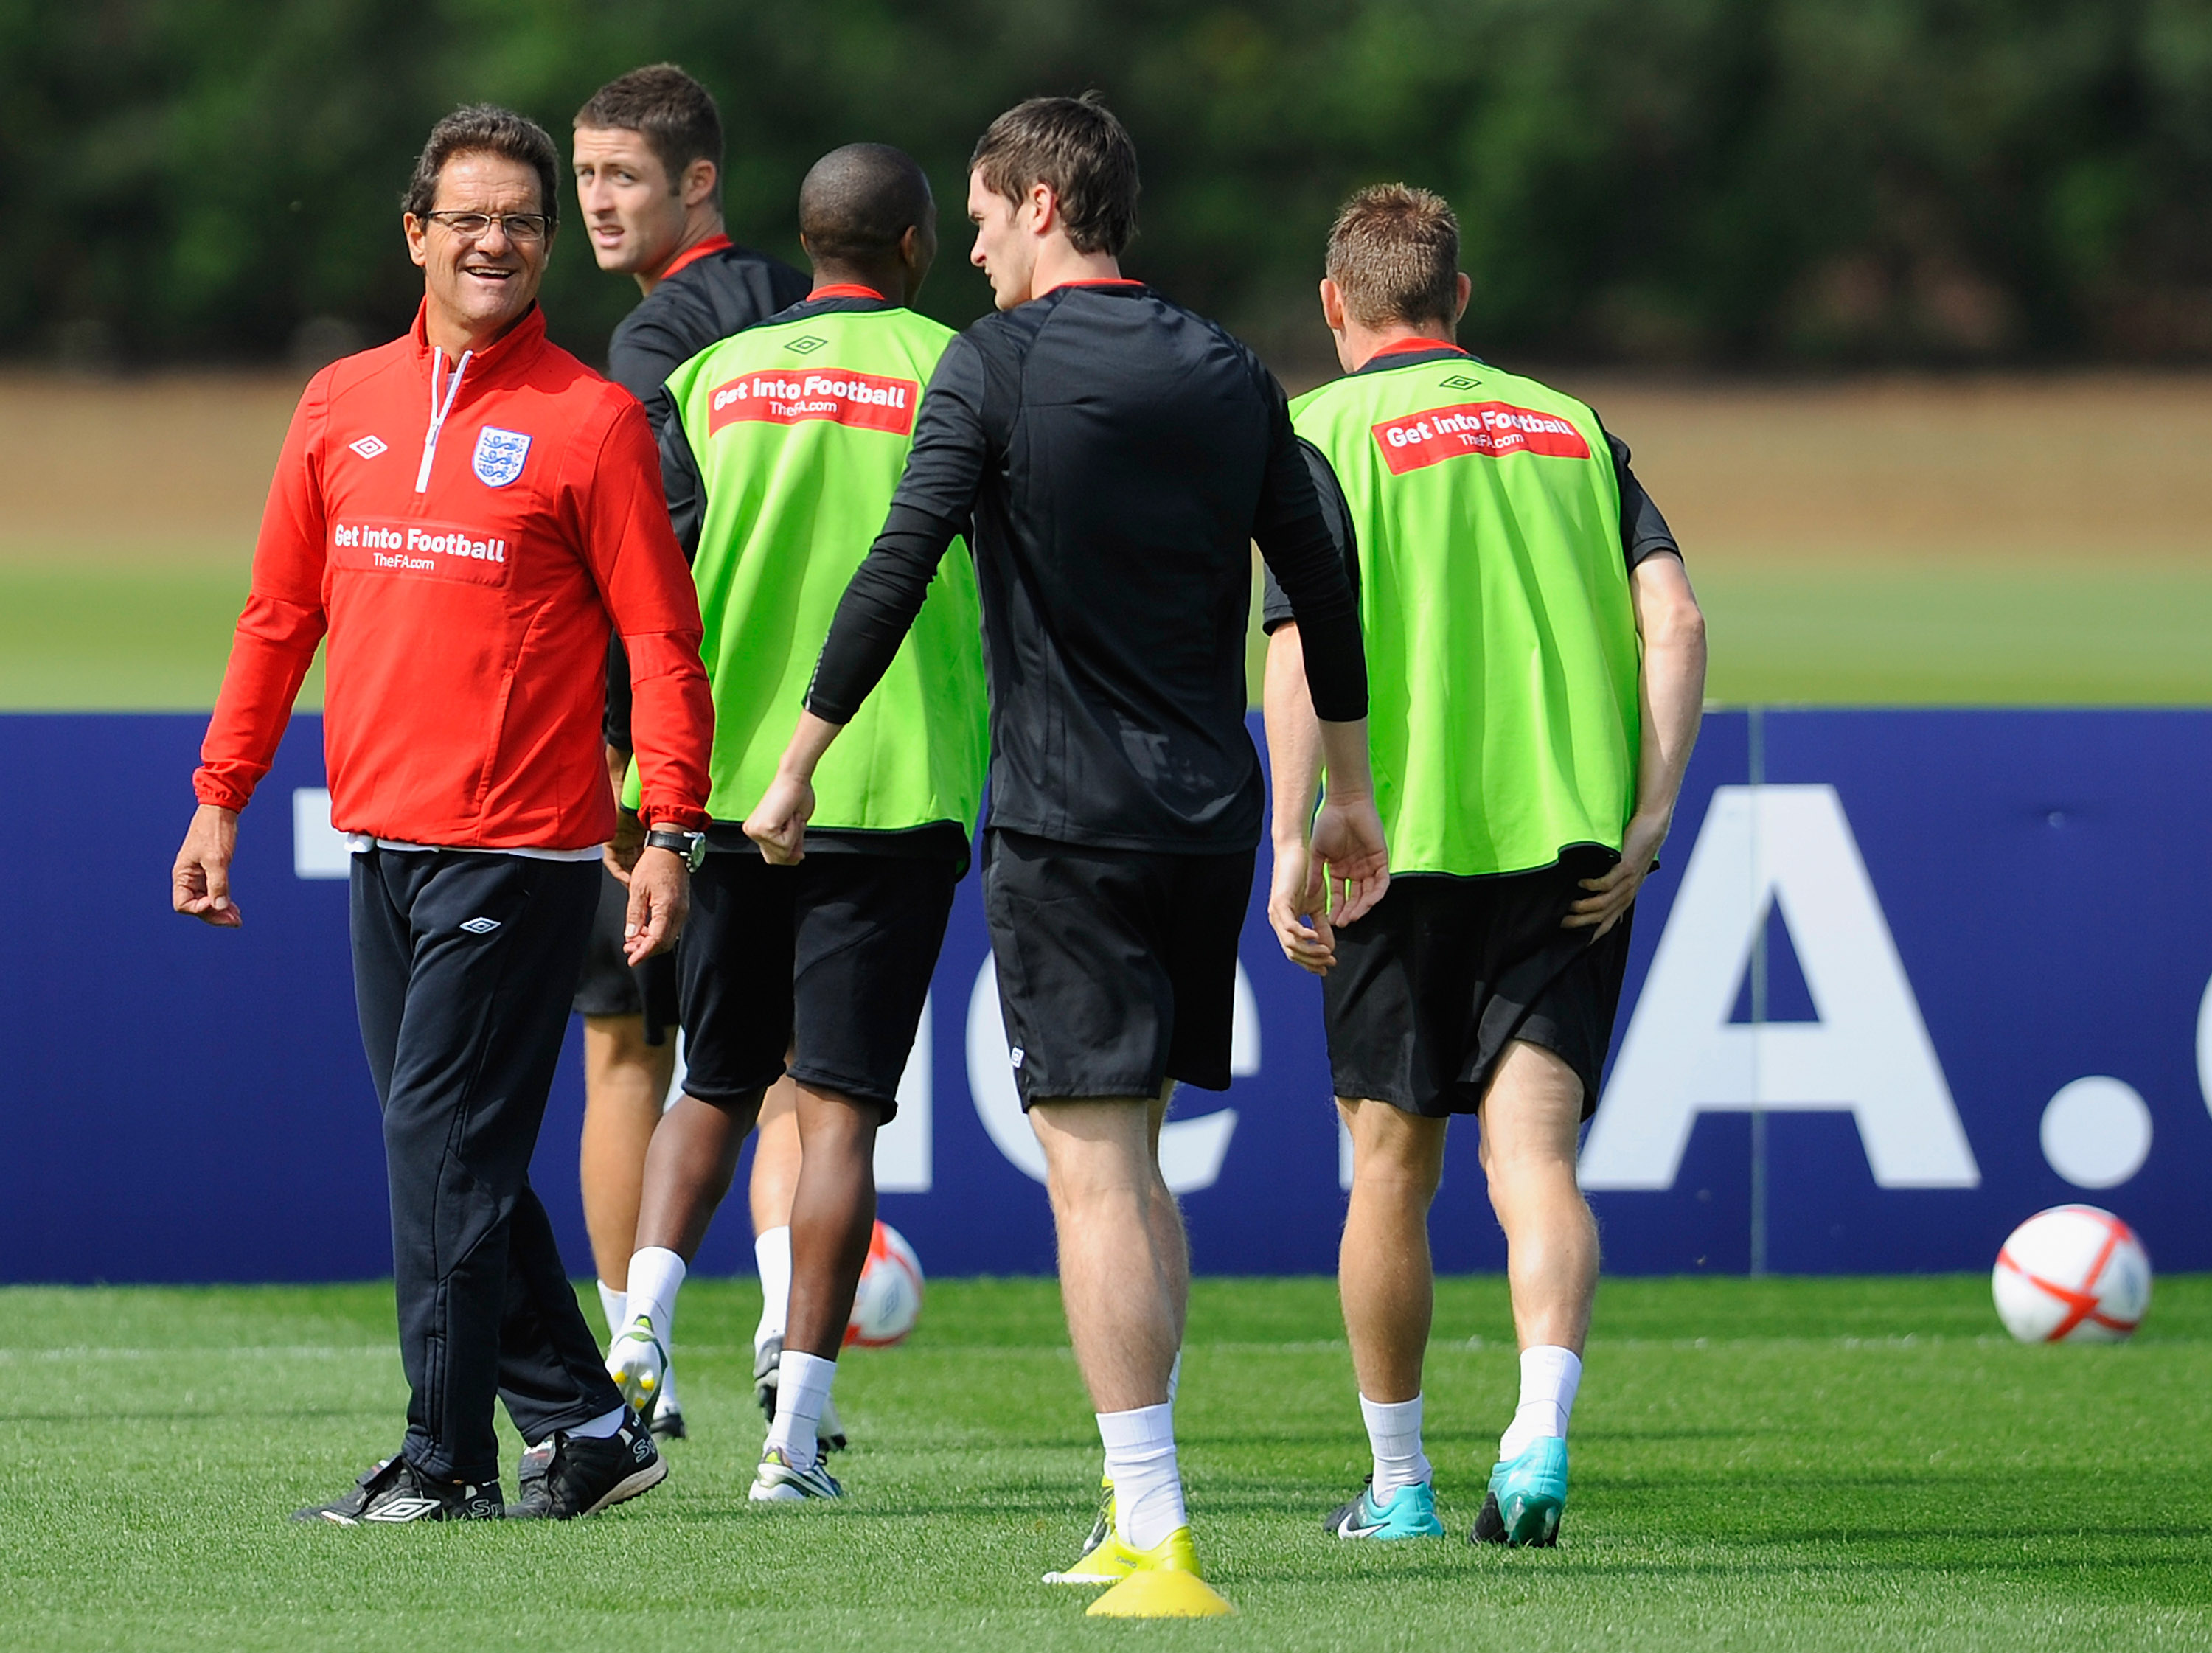 ST ALBANS, ENGLAND - AUGUST 09:  England manger Fabio Capello shares a joke with Adam Johnson during the England training session at London Colney on August 9, 2010 in St Albans, England.  (Photo by Michael Regan/Getty Images)